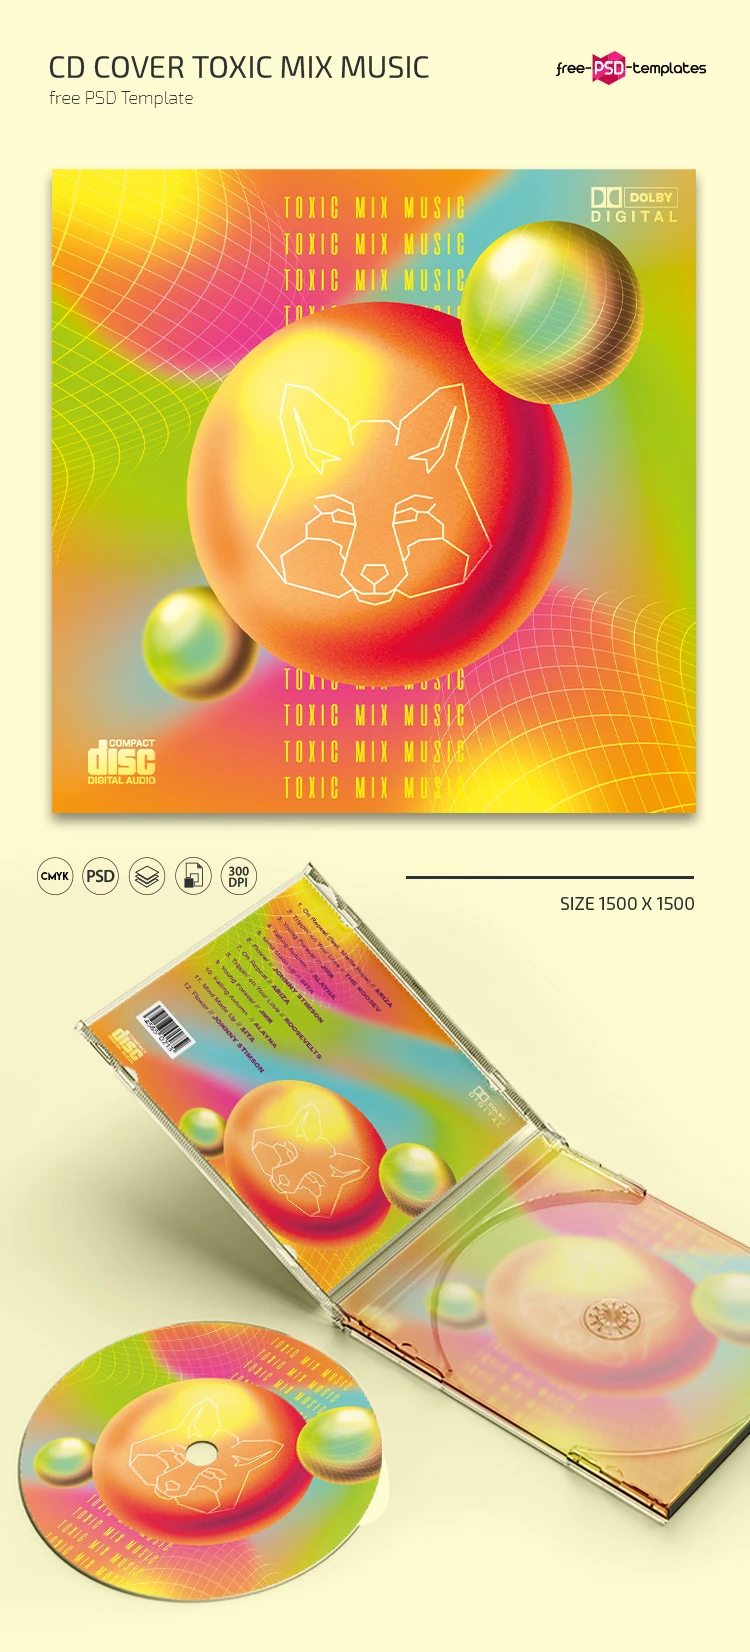 Free CD Cover Toxic Mix Music PSD Template